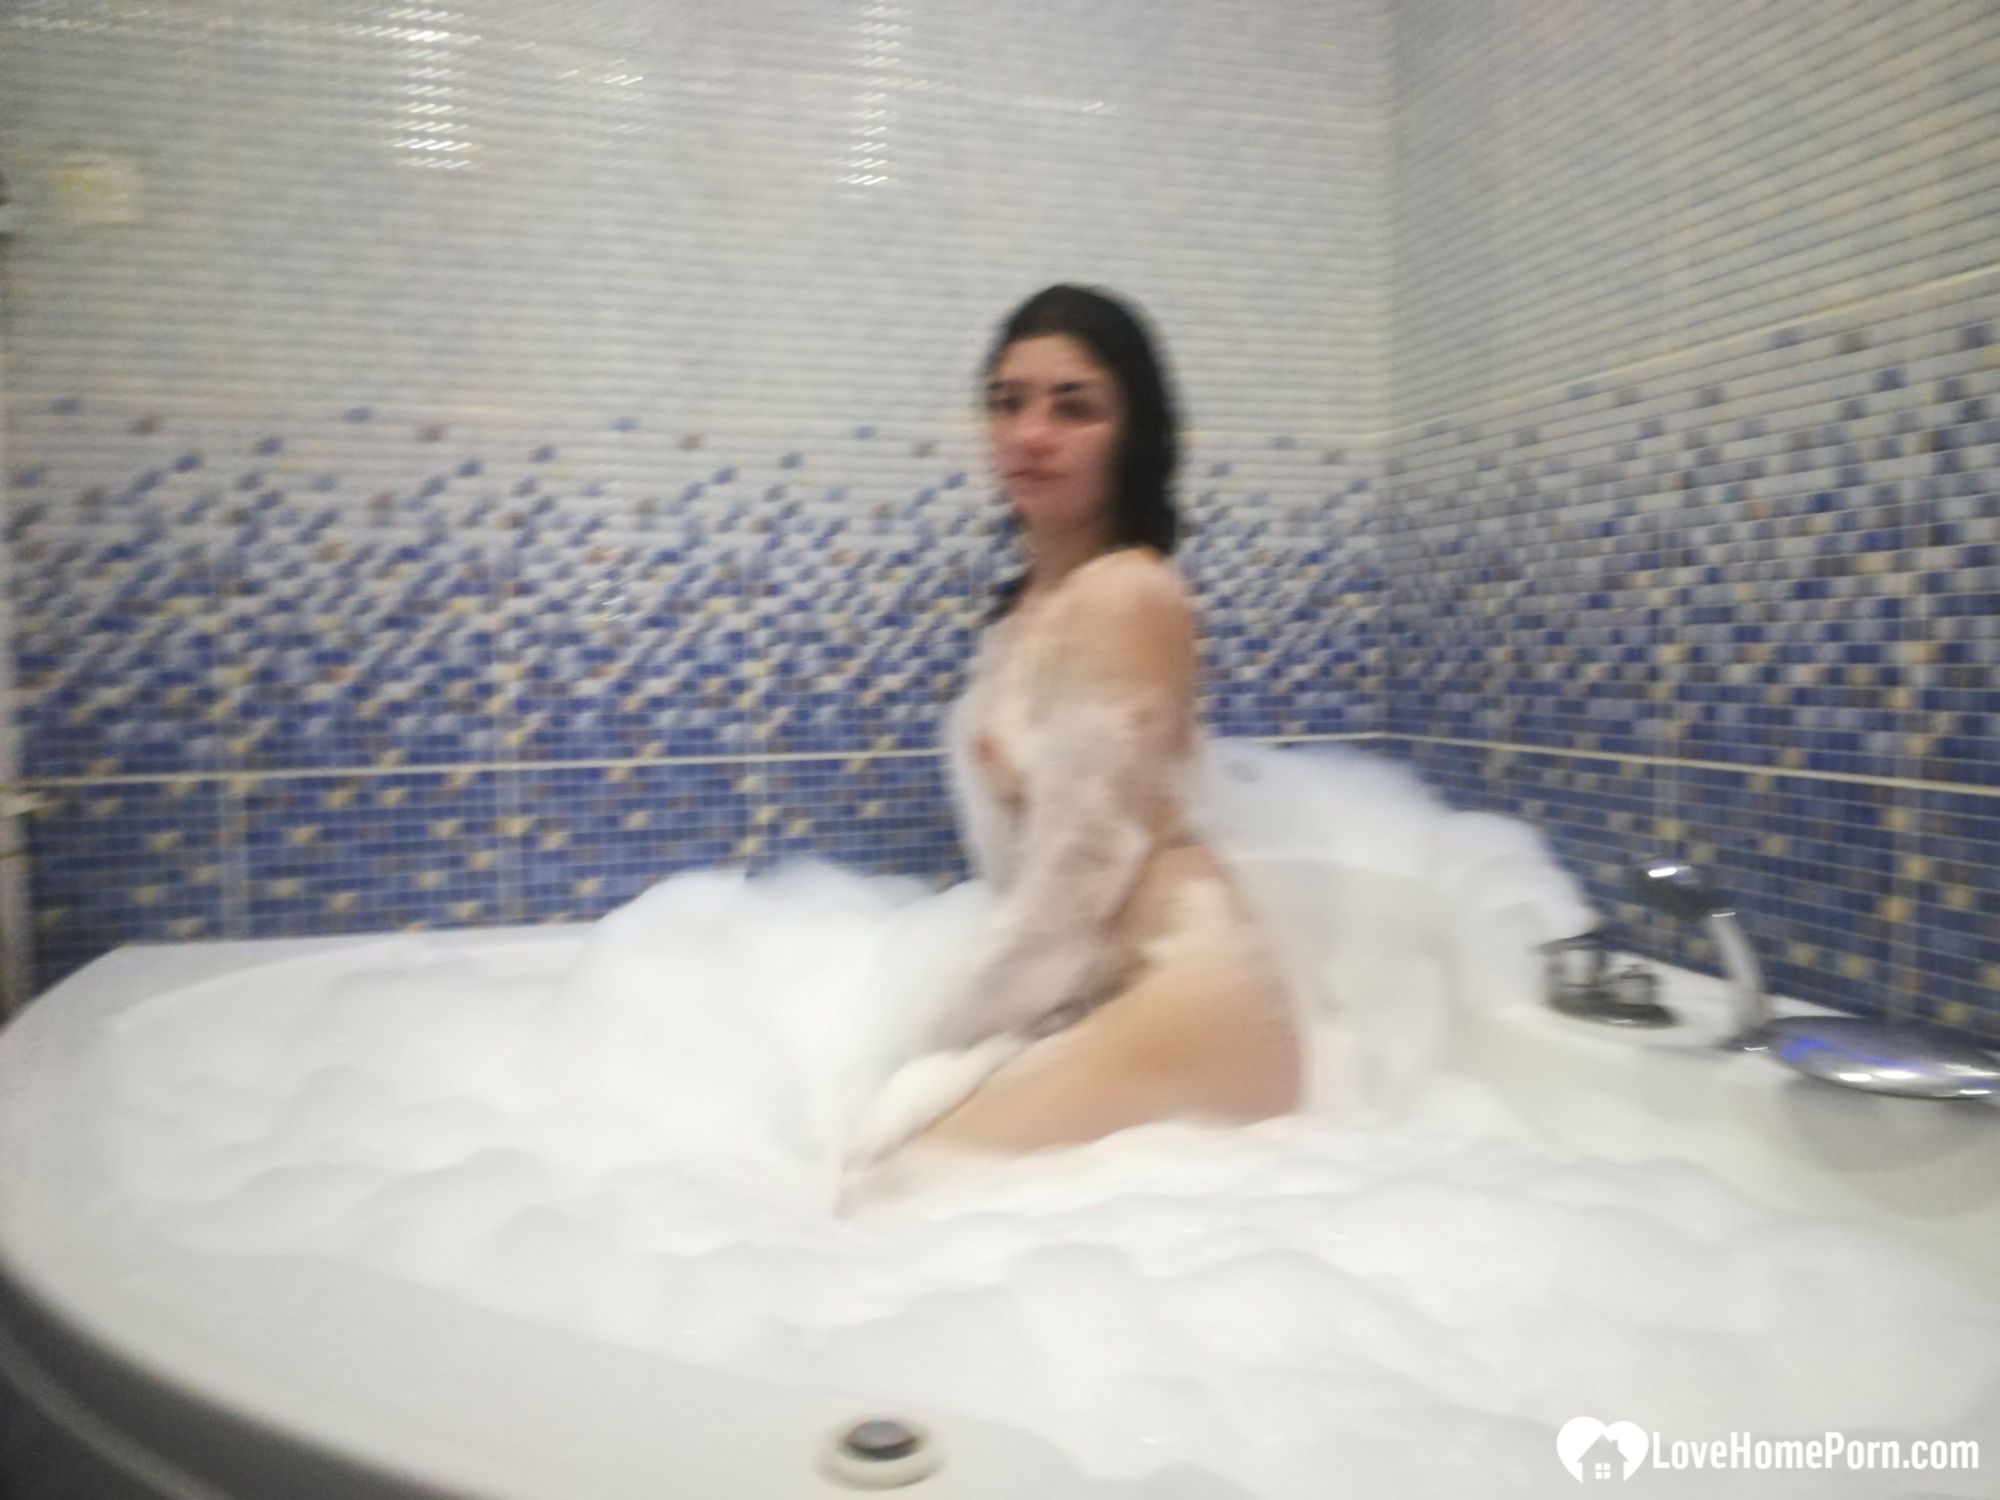 Recording my hot girlfriend in the shower #10